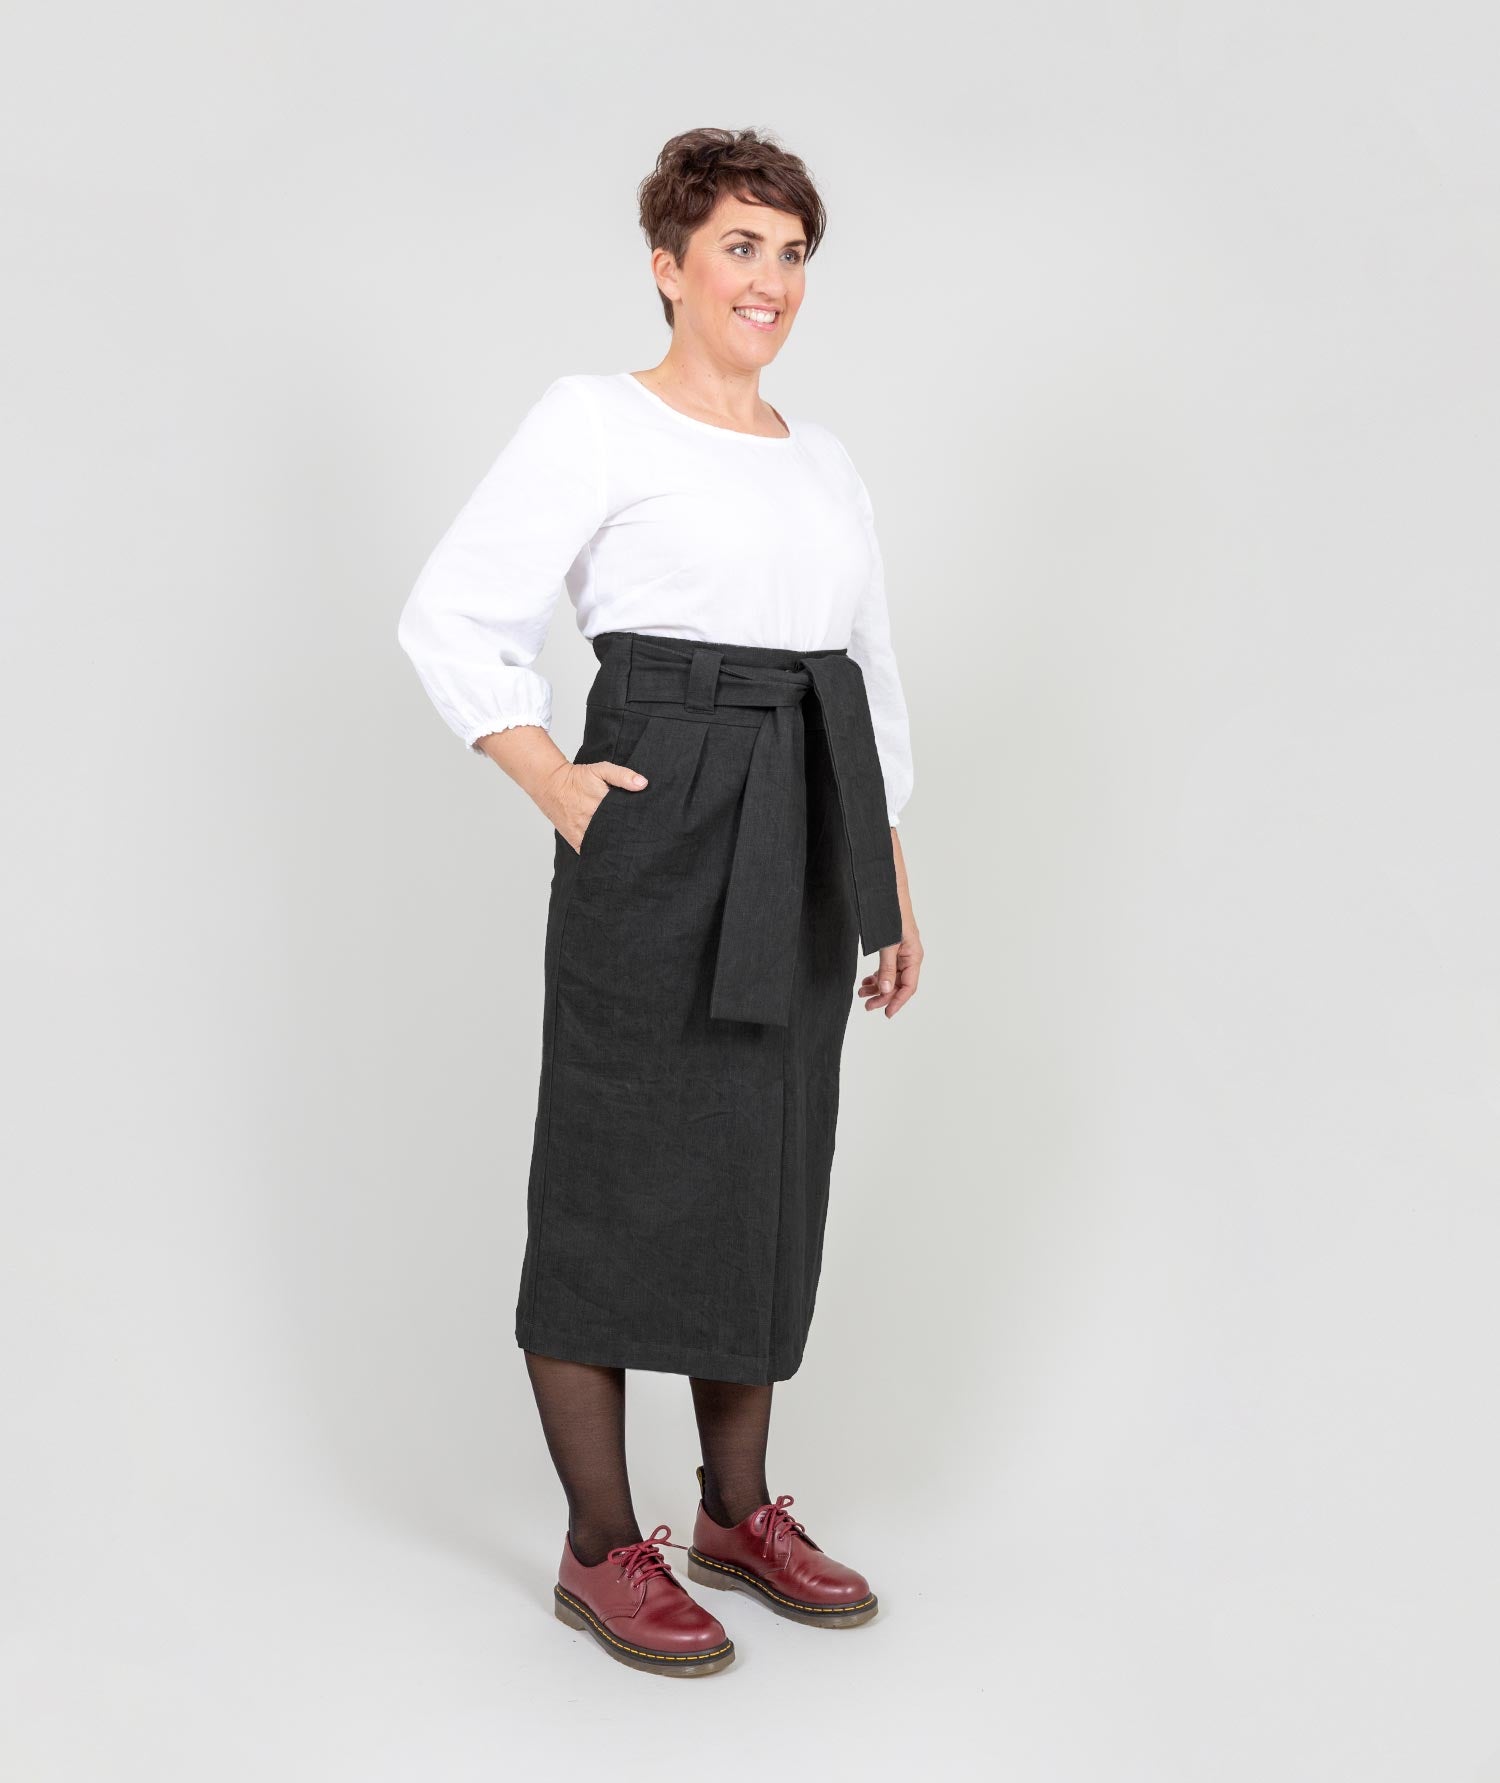 The "All Wrapped Up Skirt" - Black